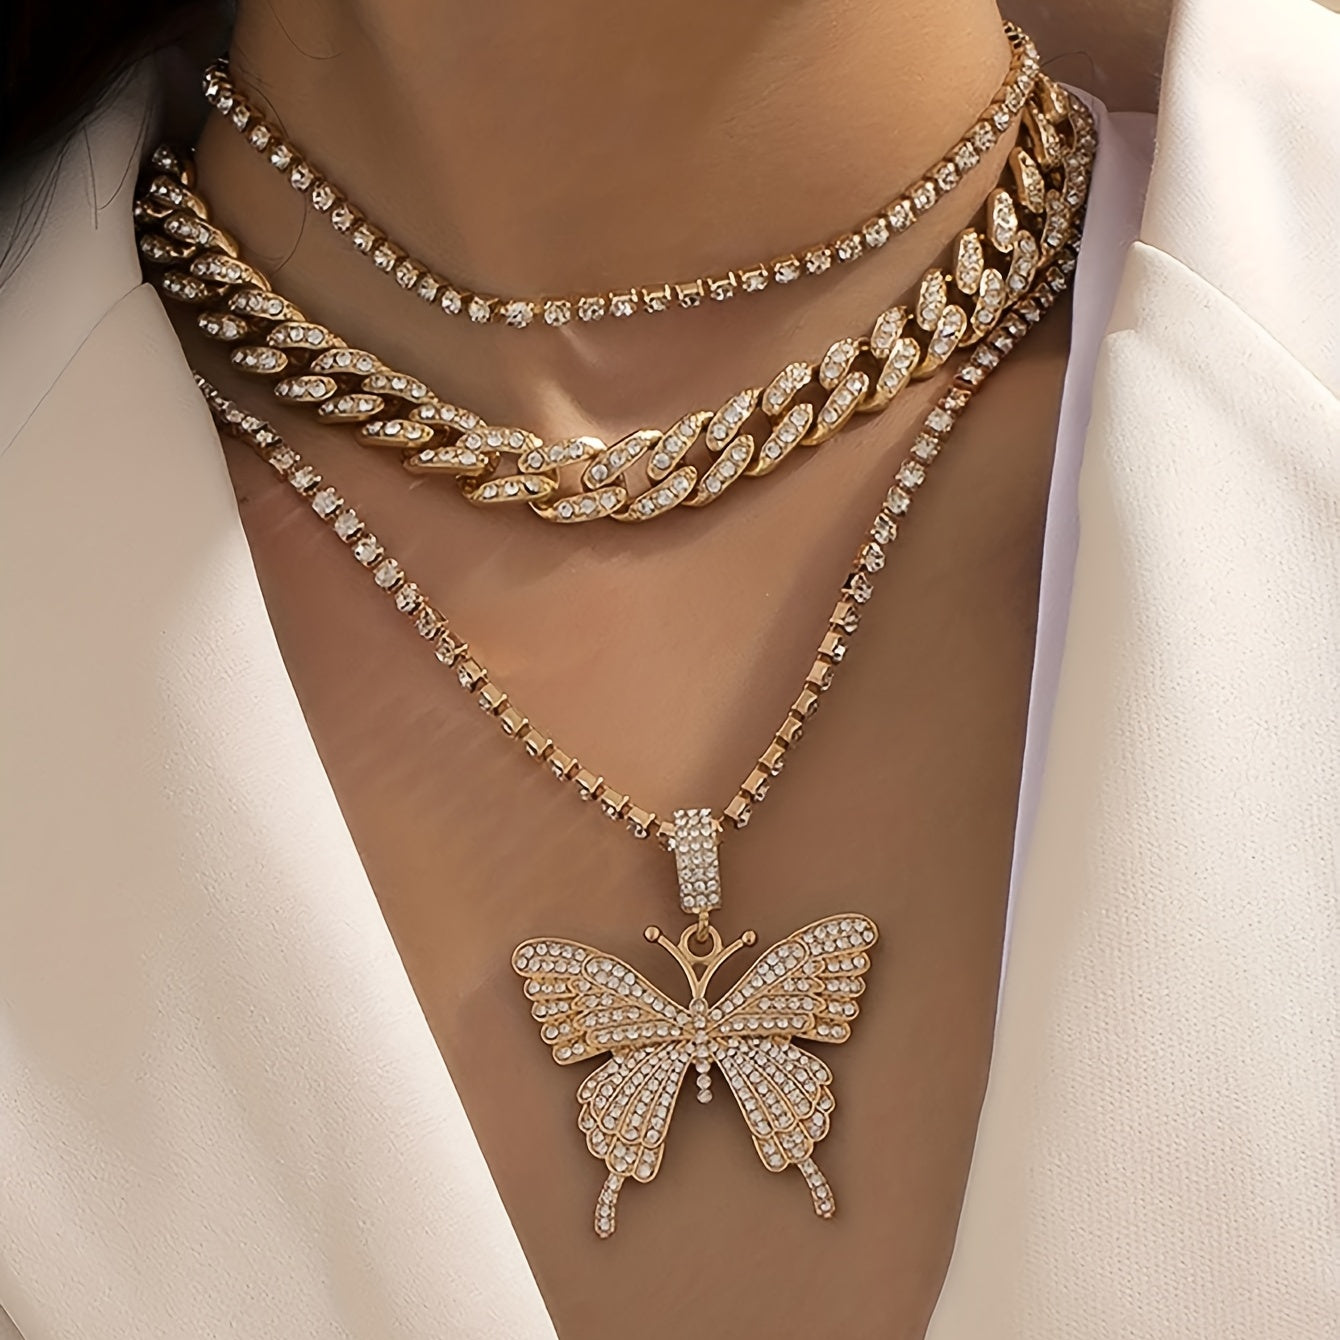 3pcs Vintage Exaggerated Butterfly Rhinestones Cuban Chain Set Adjustable Necklace